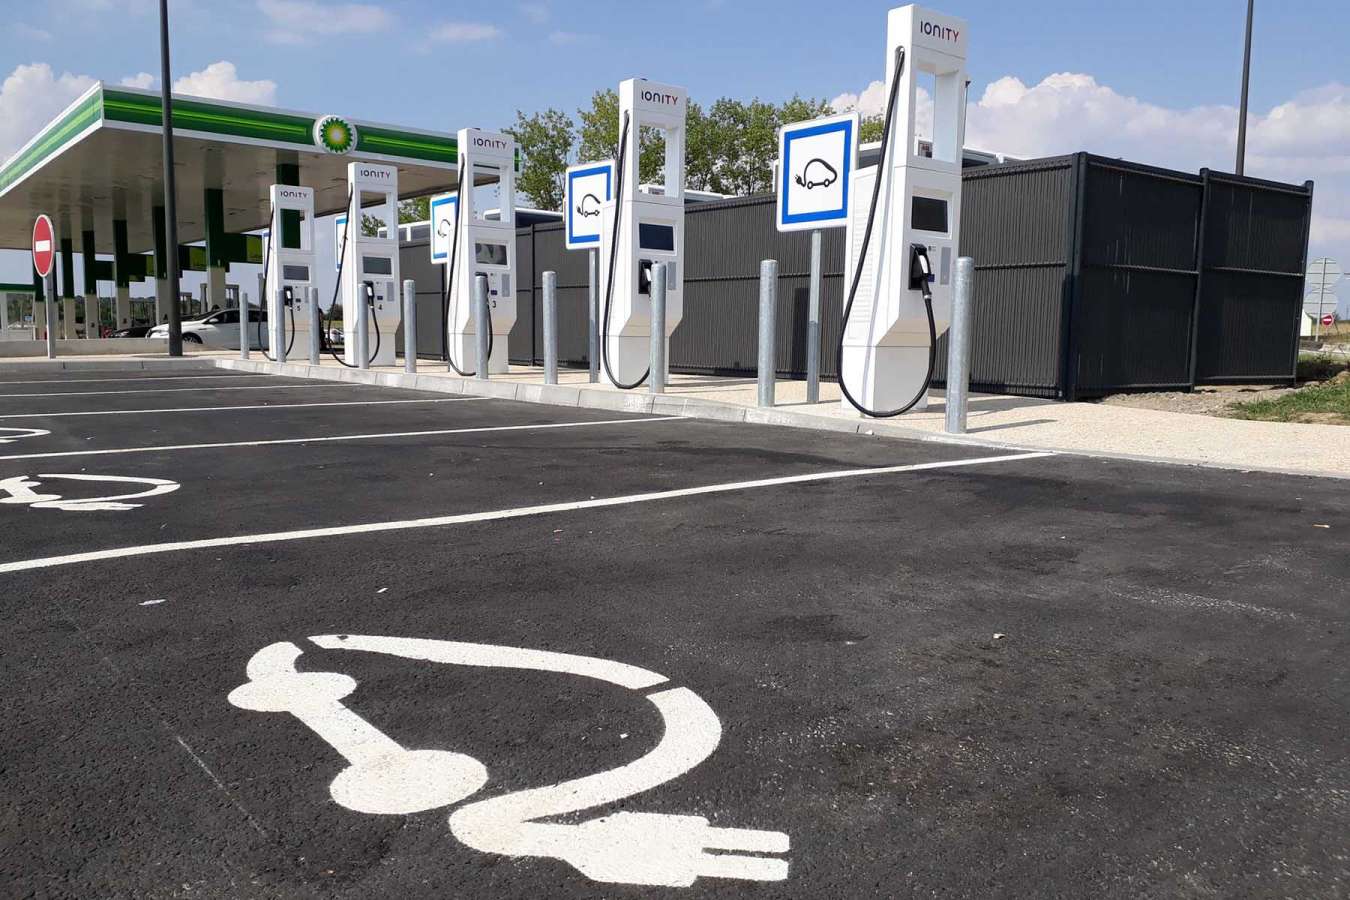 France: Half of highway ‘aires’ have fast charging for EVs